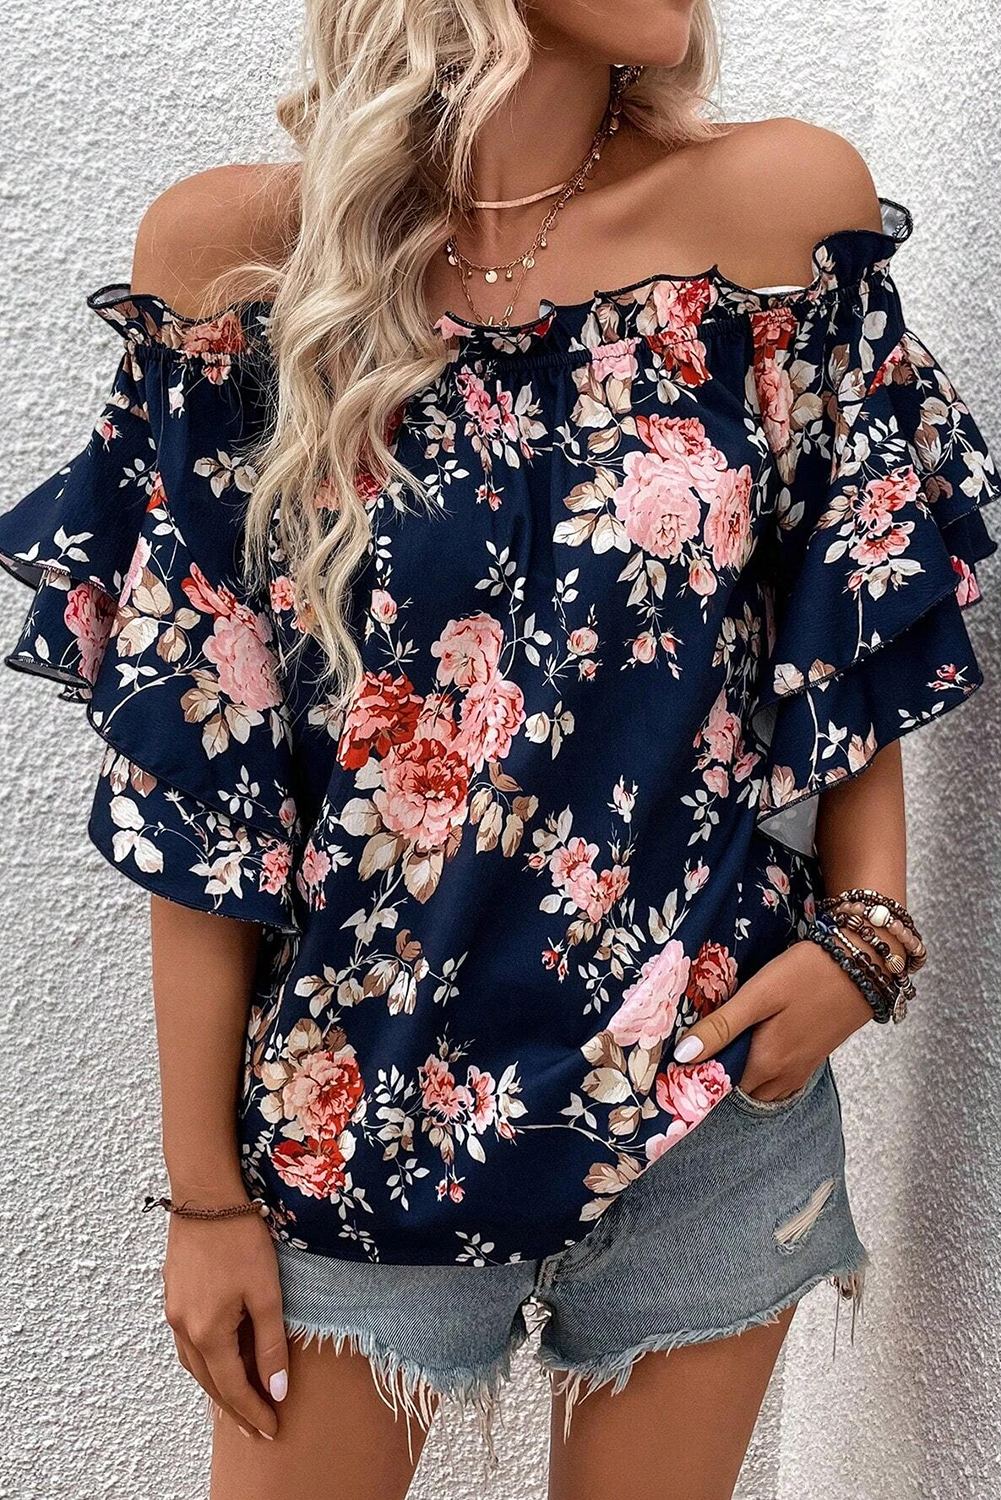 Chic Blue Floral Off Shoulder Blouse with Ruffled Sleeves